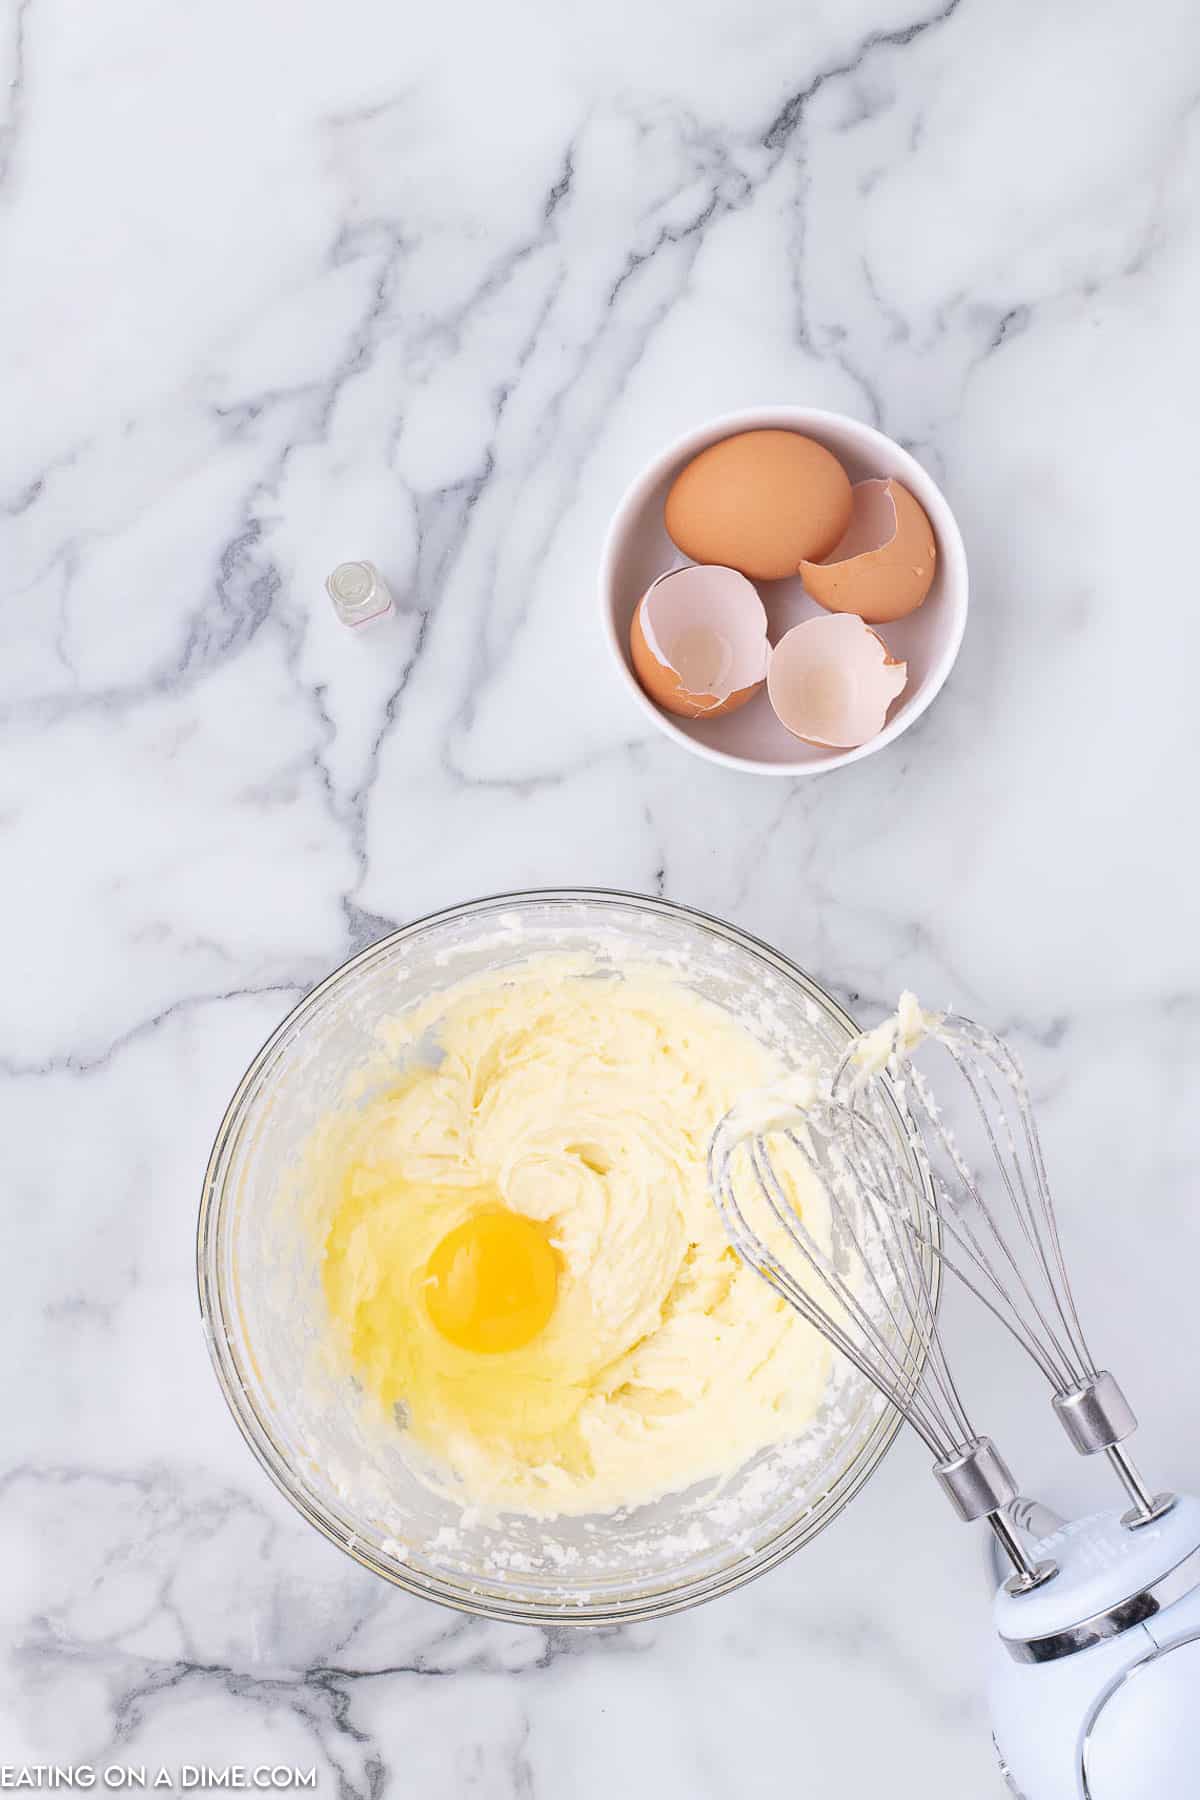 Mix in eggs to the butter mixture in a bowl with a hand mixer